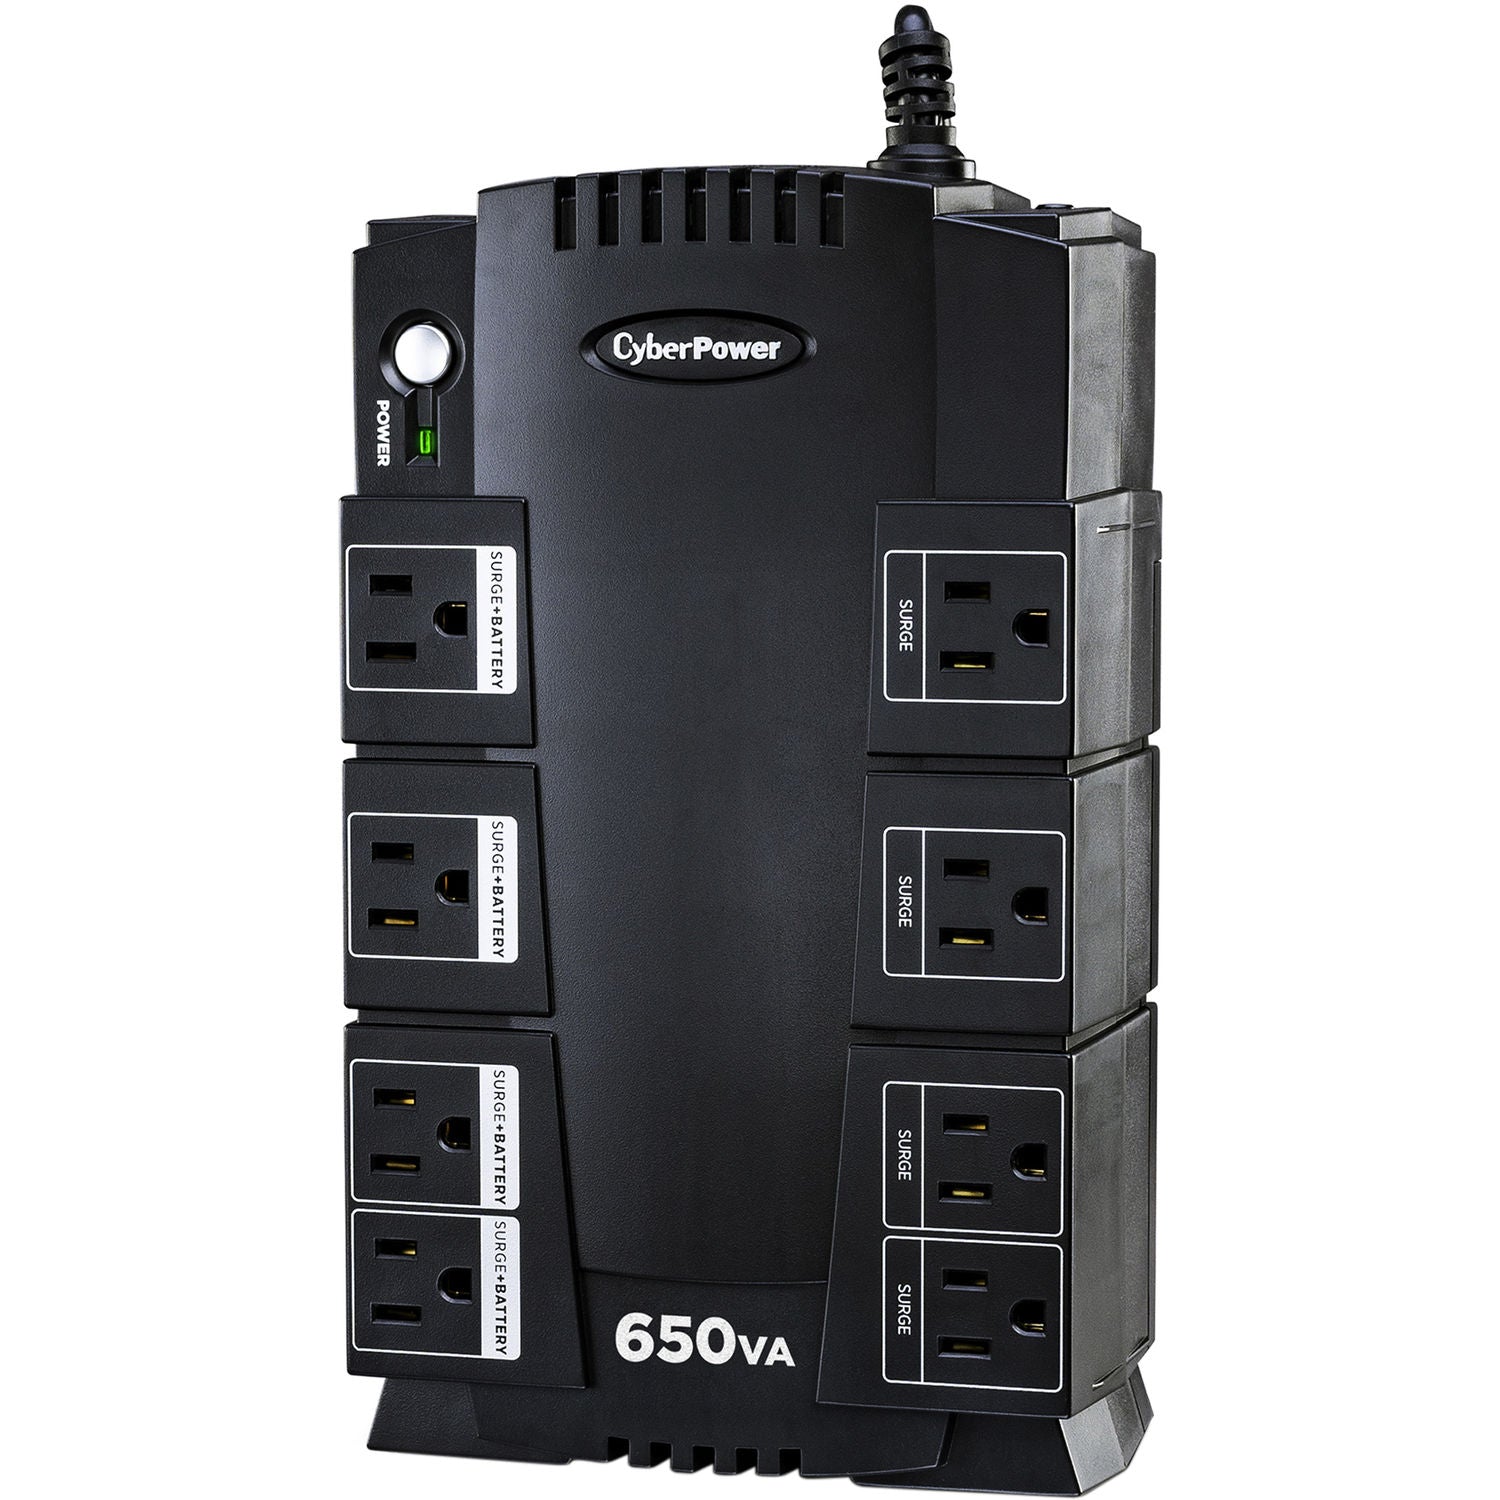 CyberPower SX650G-R 650VA/375W, 8 OL, RJ11/RJ45, 890J 8-Outlet UPS System - New Battery Certified Refurbished